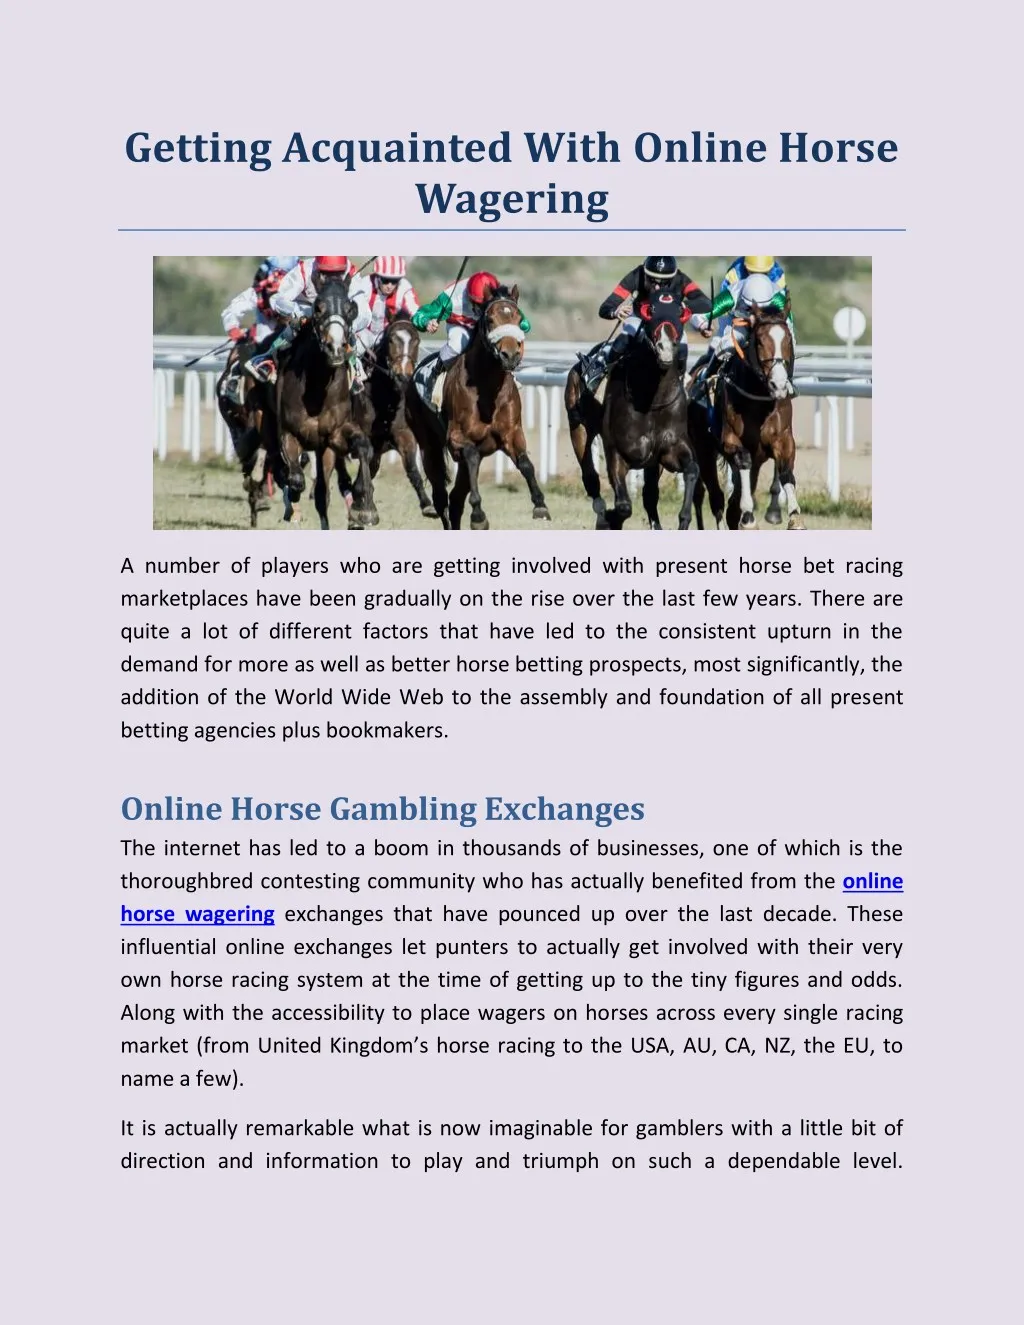 getting acquainted with online horse wagering